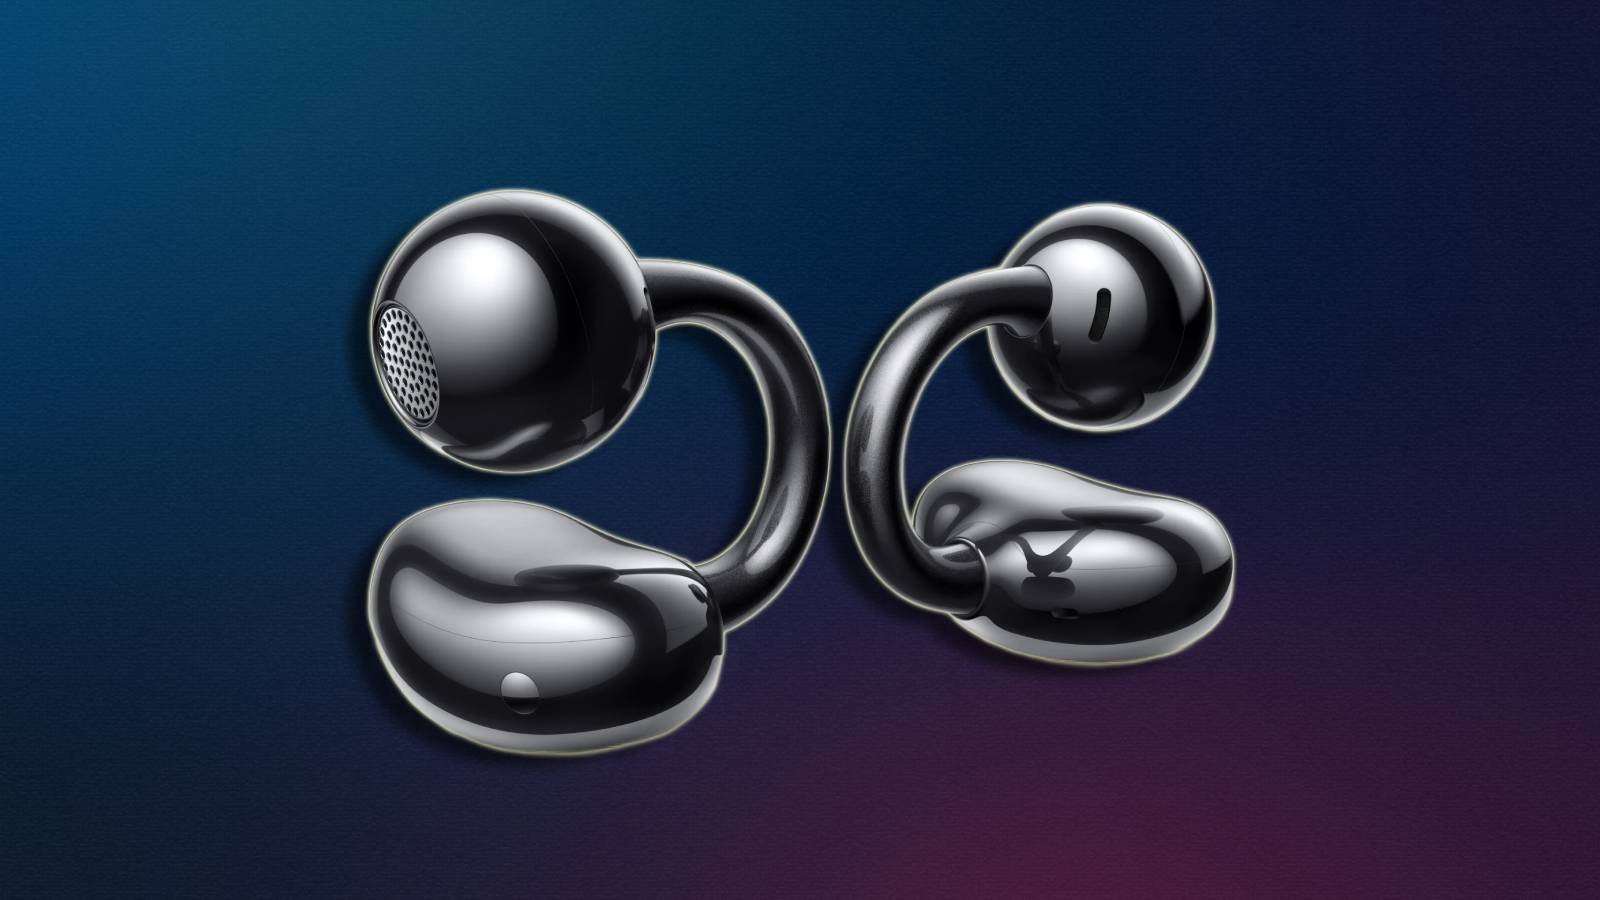 The Huawei FreeClip have an unusual, innovative open ear earbuds design –  but is it genius or a gimmick?